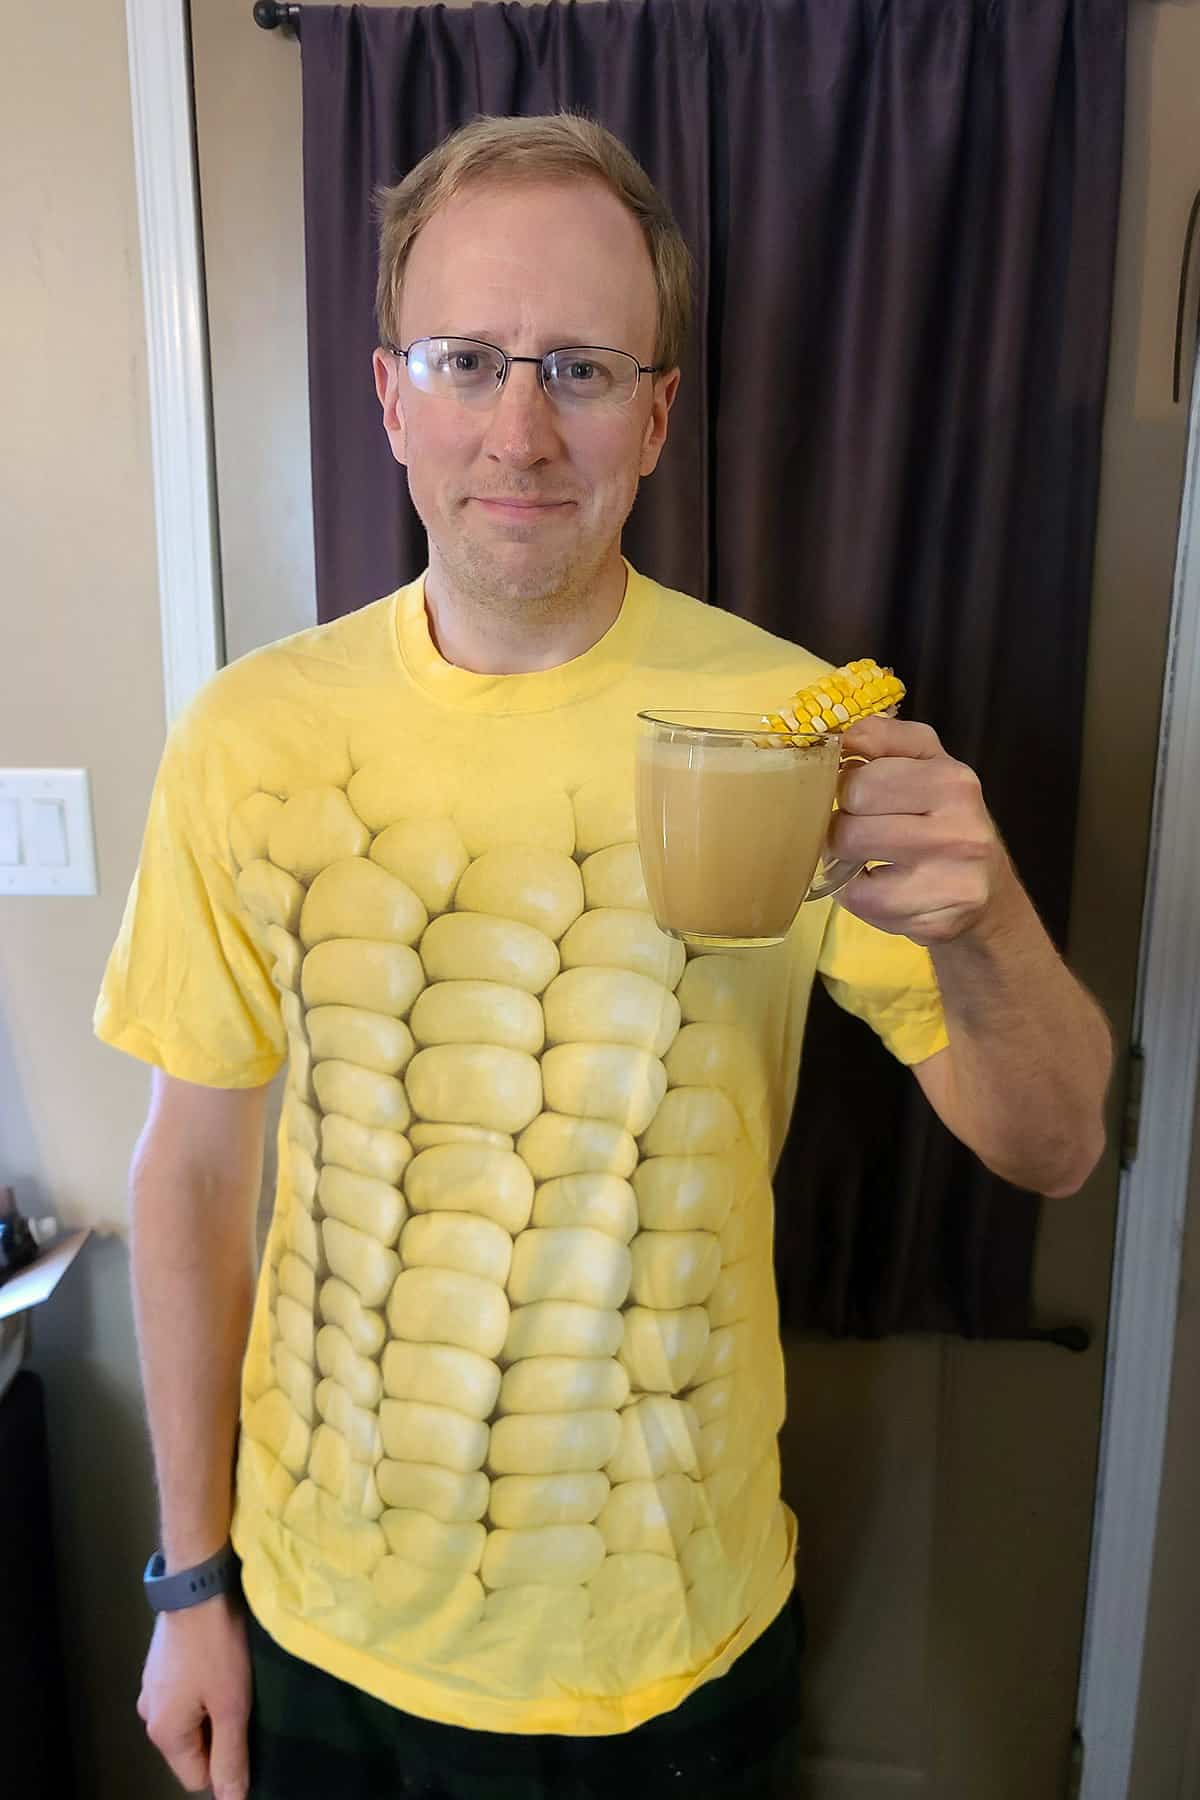 A middle aged white man in a corn shirt holding a mug of corn on the cobbuccino.